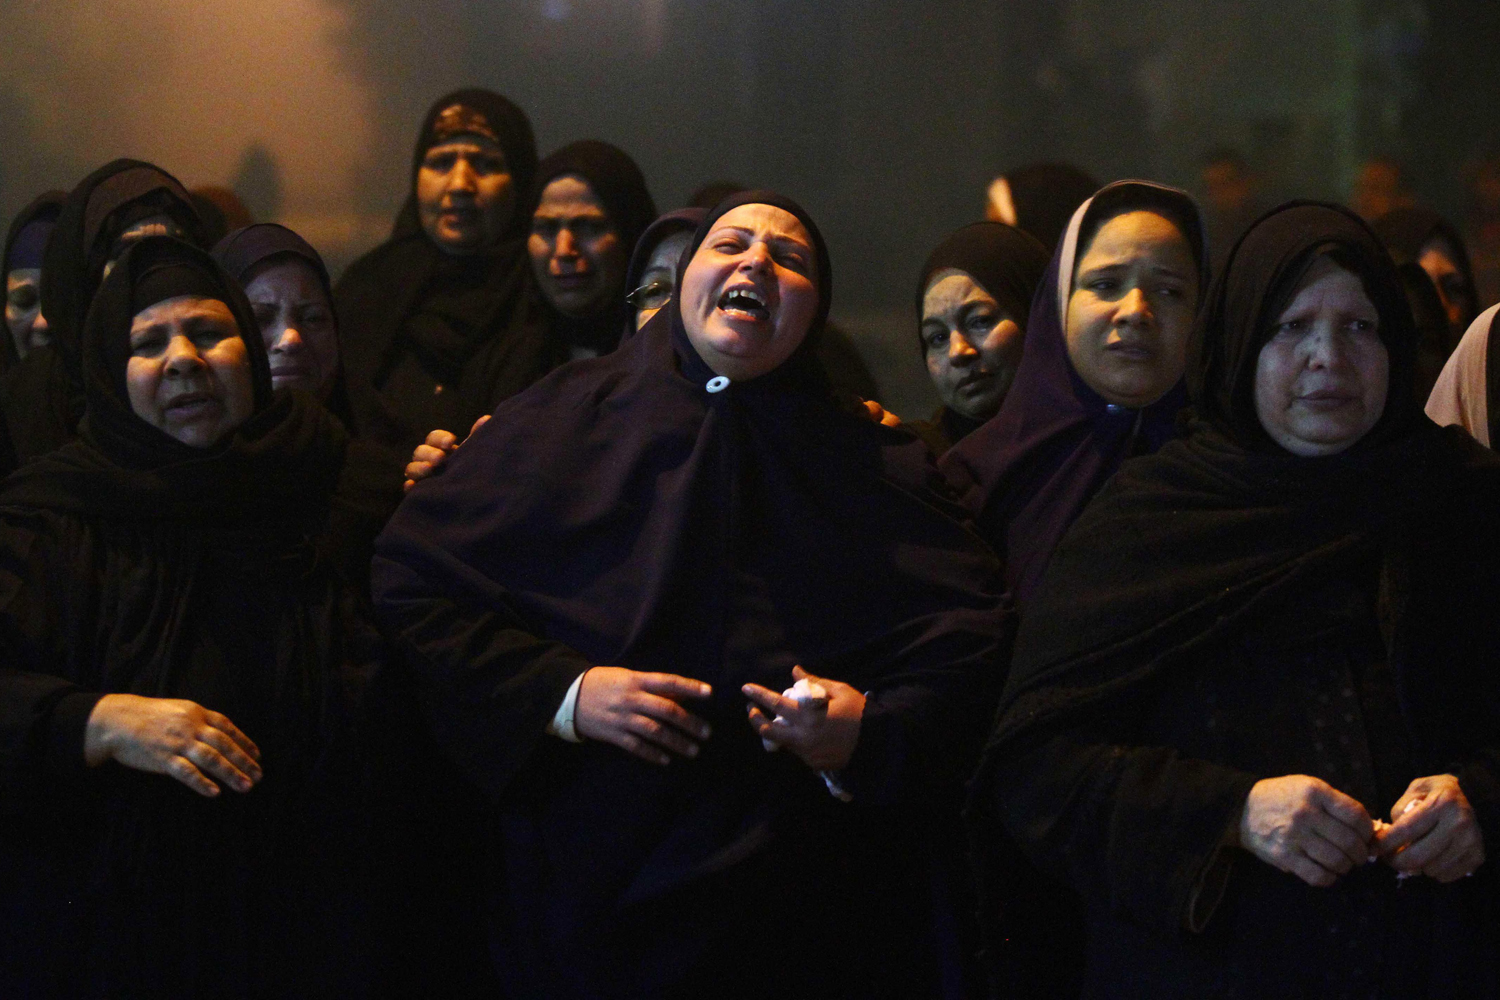 Mar. 29, 2014. Relatives of 22 year-old journalist Mayada Ashraf, who was killed during clashes between Egyptian police and Muslim Brotherhood supporters, mourn during her funeral in El-Monofiya, north of Cairo, Egypt.